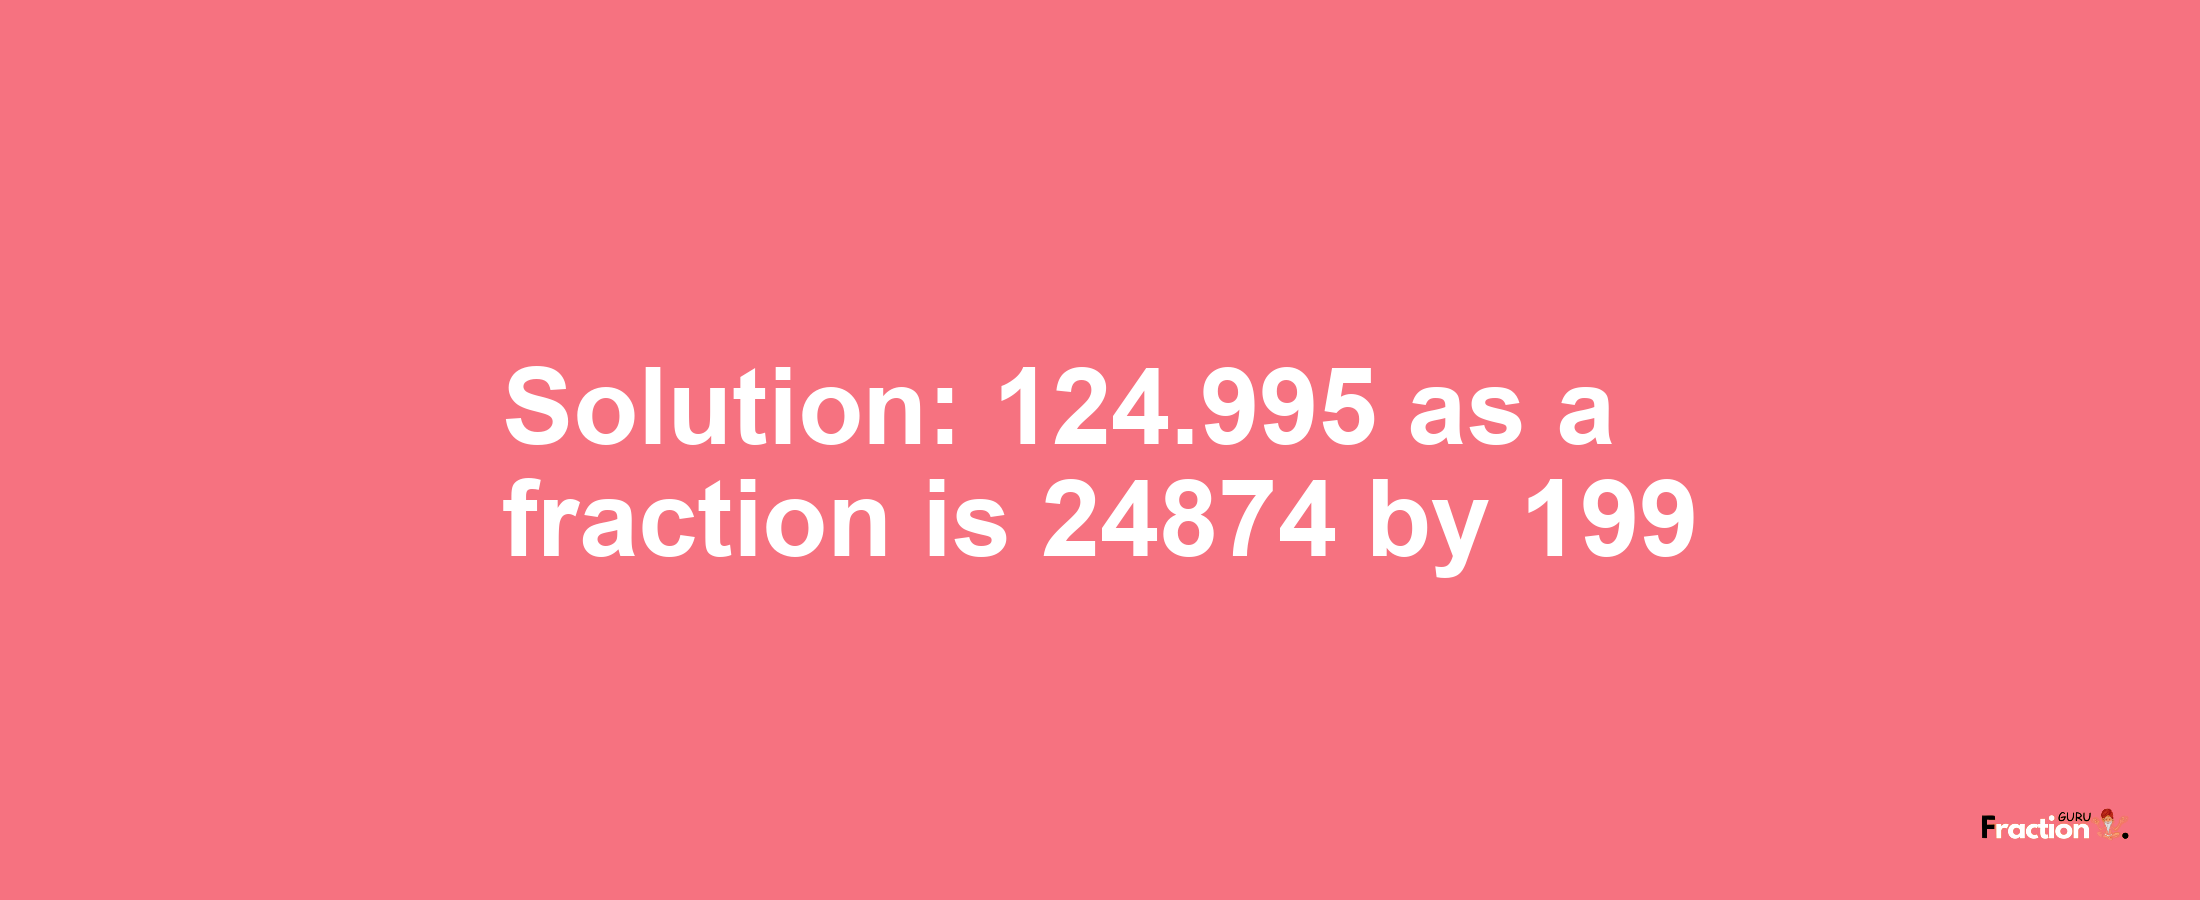 Solution:124.995 as a fraction is 24874/199